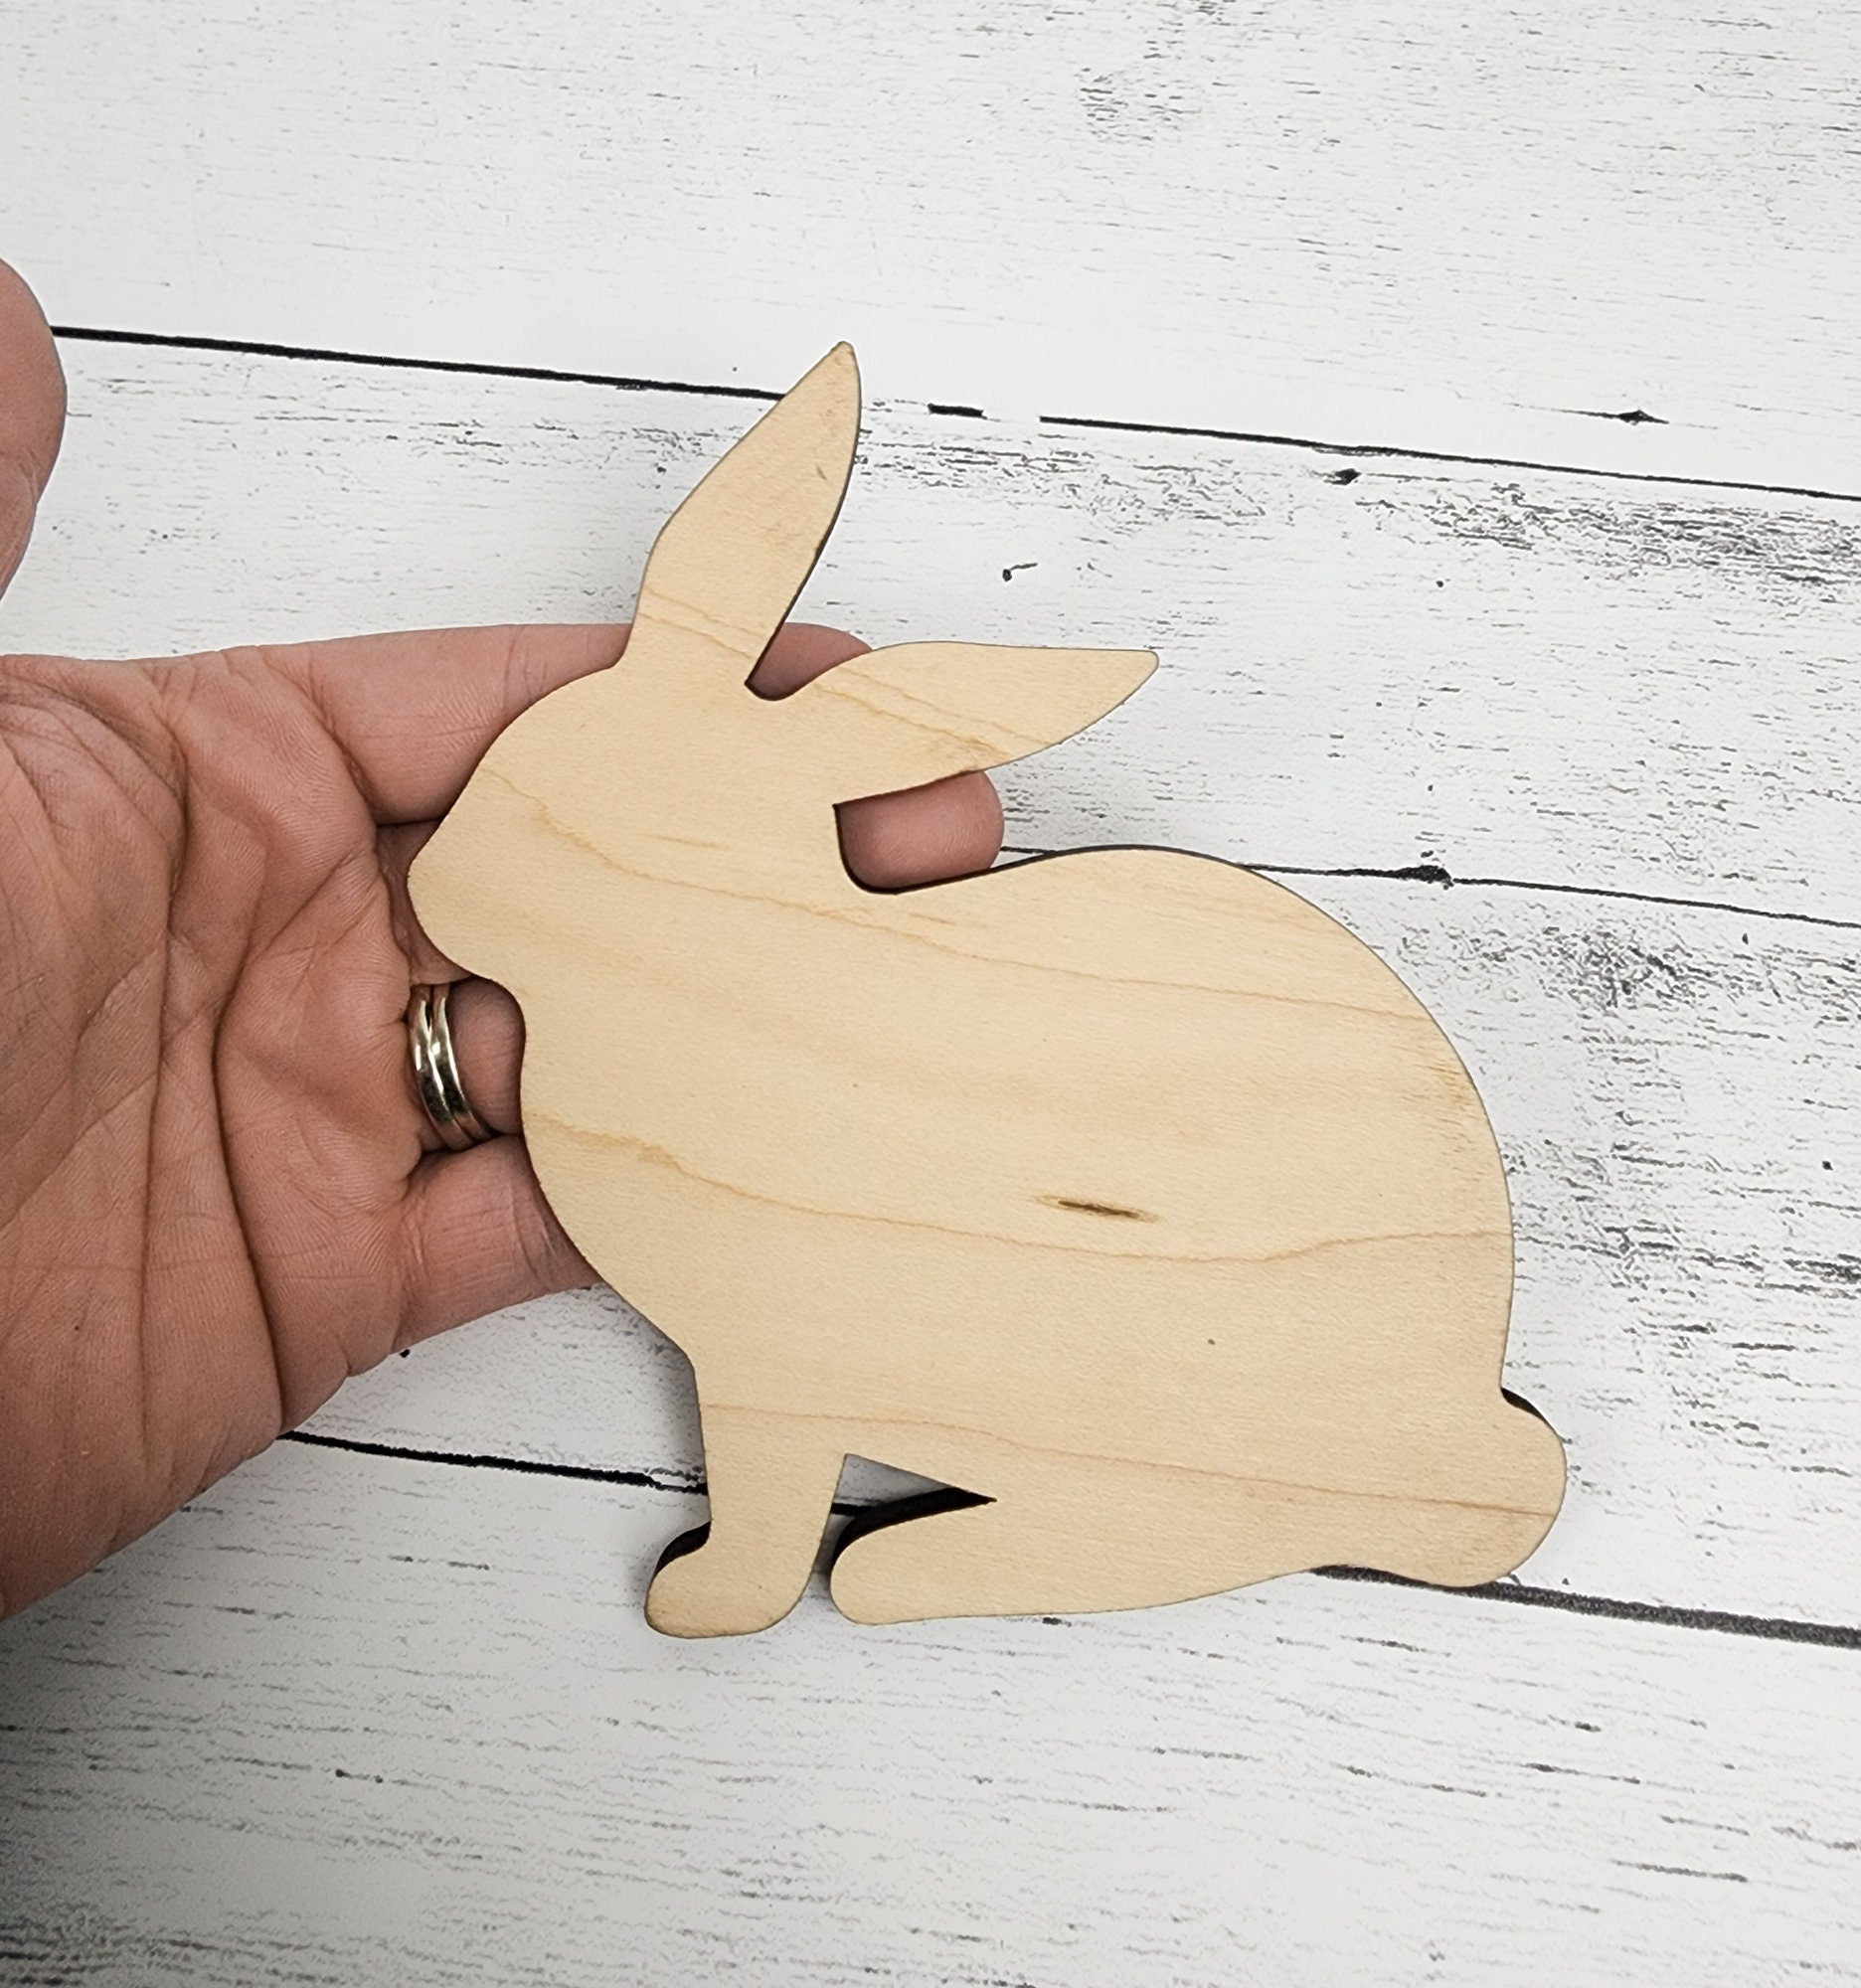 Bunny, Easter Wood Shape, Wooden Rabbit Blank, Unfinished Cut out, Shapes for Crafts DIY Wood Blank, Spring Sign Making, Easter Sign making